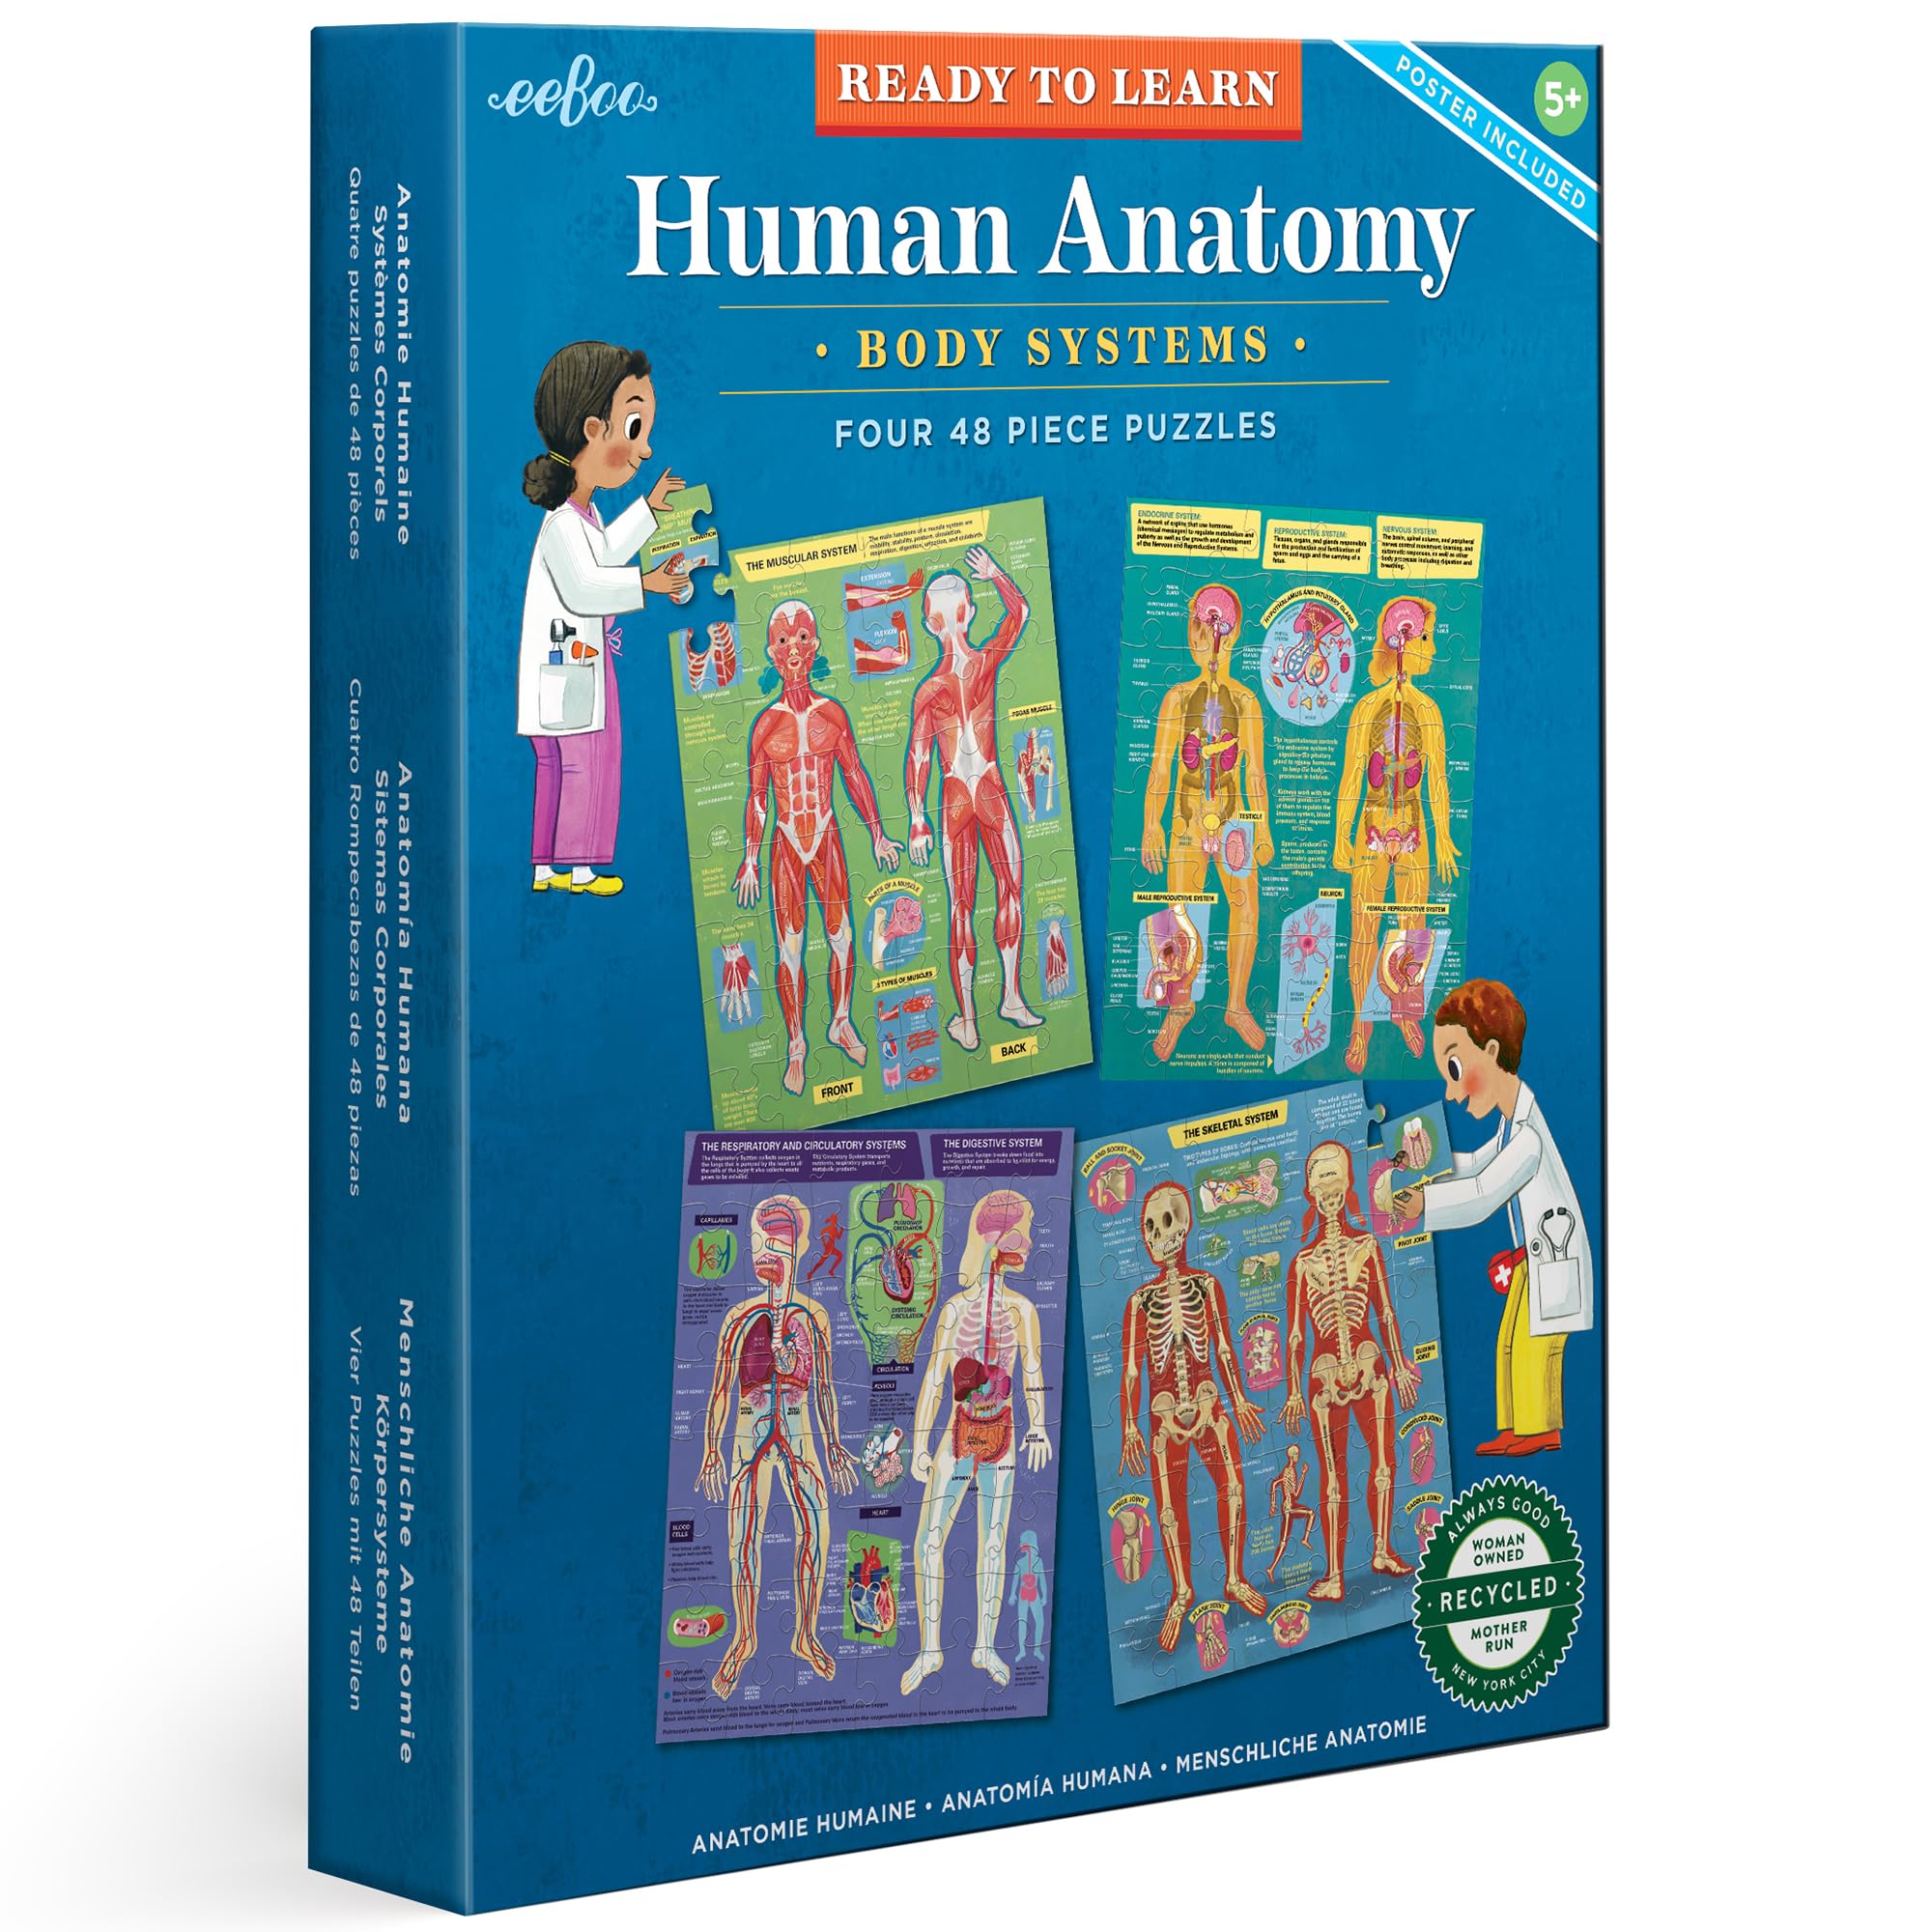 eeBoo: Ready to Learn: Human Anatomy 4-Puzzles - Body Systems Set of 4-48 Piece Jigsaws, Includes Educational Poster, Kids Ages 8+